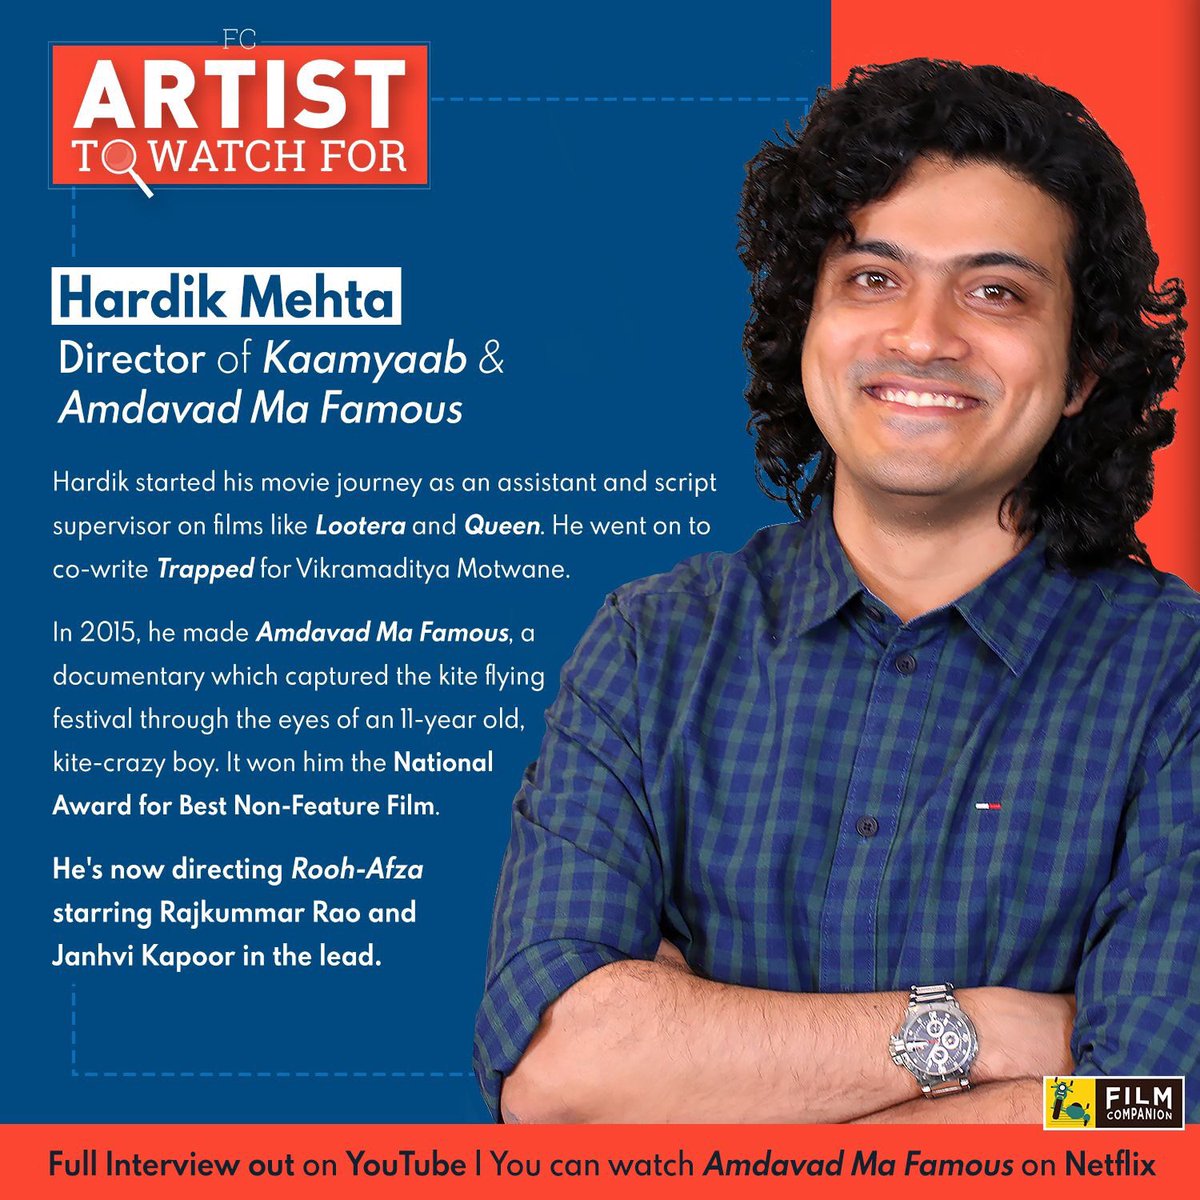 This month on FC #ArtistToWatchFor, we put the focus on filmmaker Hardik Mehta
youtu.be/NynRmzQgjF8 
#Trapped #Roohafza #Netflix